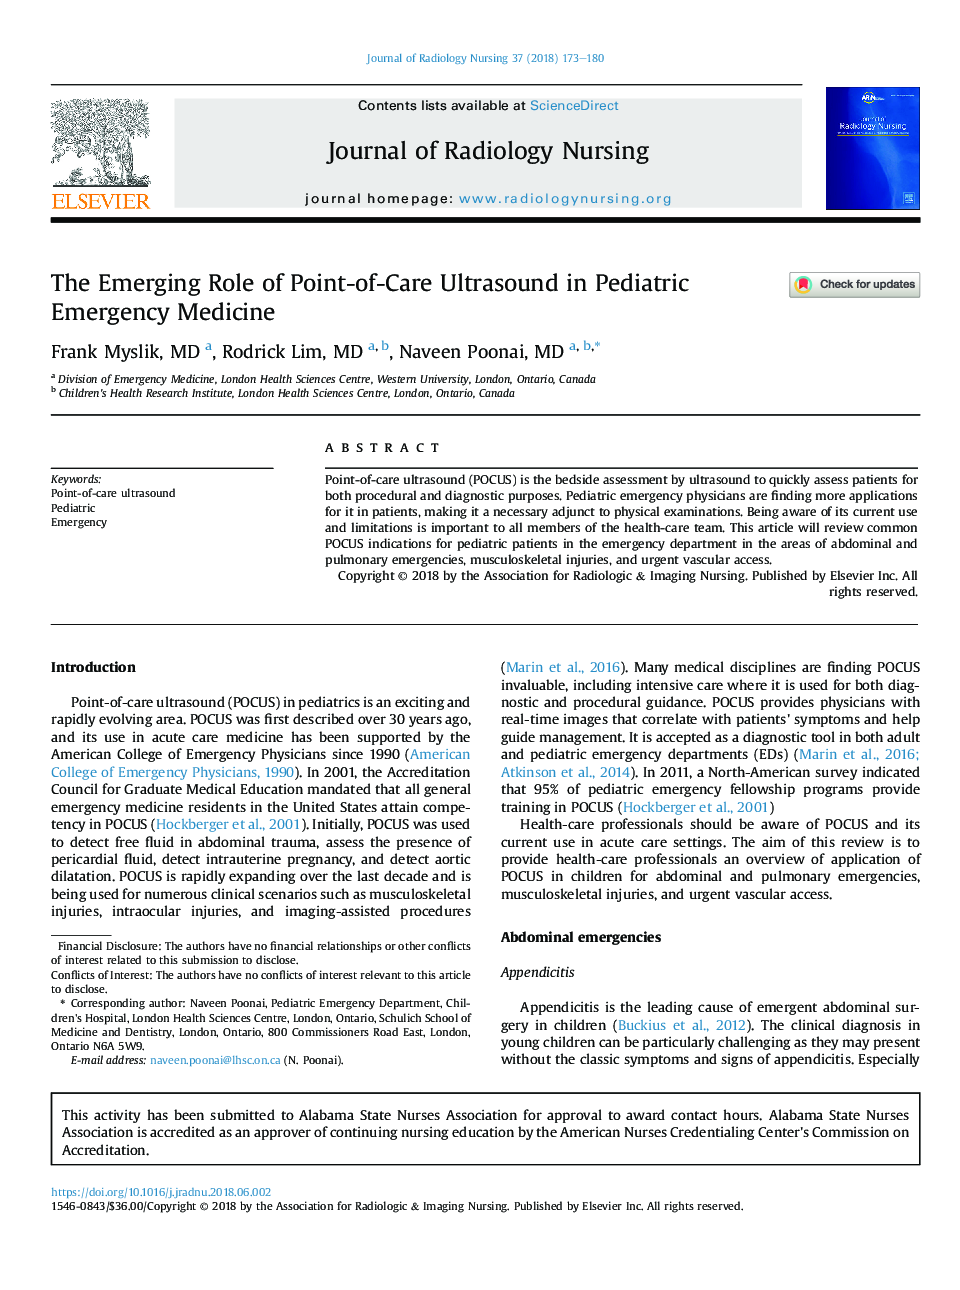 The Emerging Role of Point-of-Care Ultrasound in Pediatric Emergency Medicine